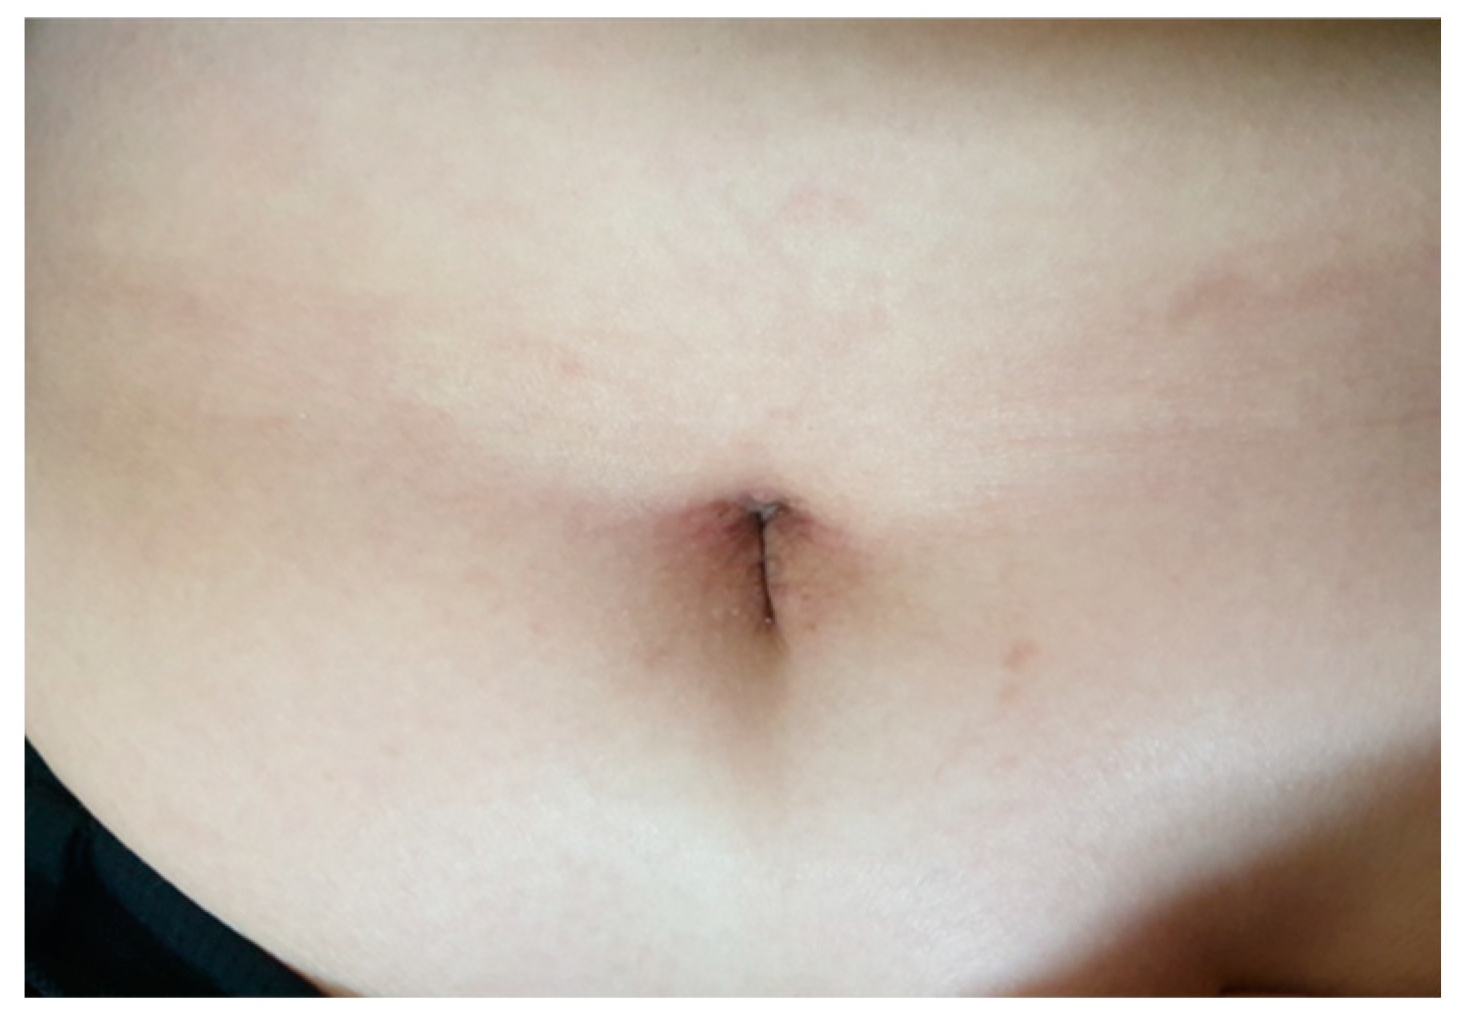 A case series of prophylactic negative pressure wound therapy use with purse -string closure in stoma closure wounds in infants | Surgical Case Reports  | Full Text